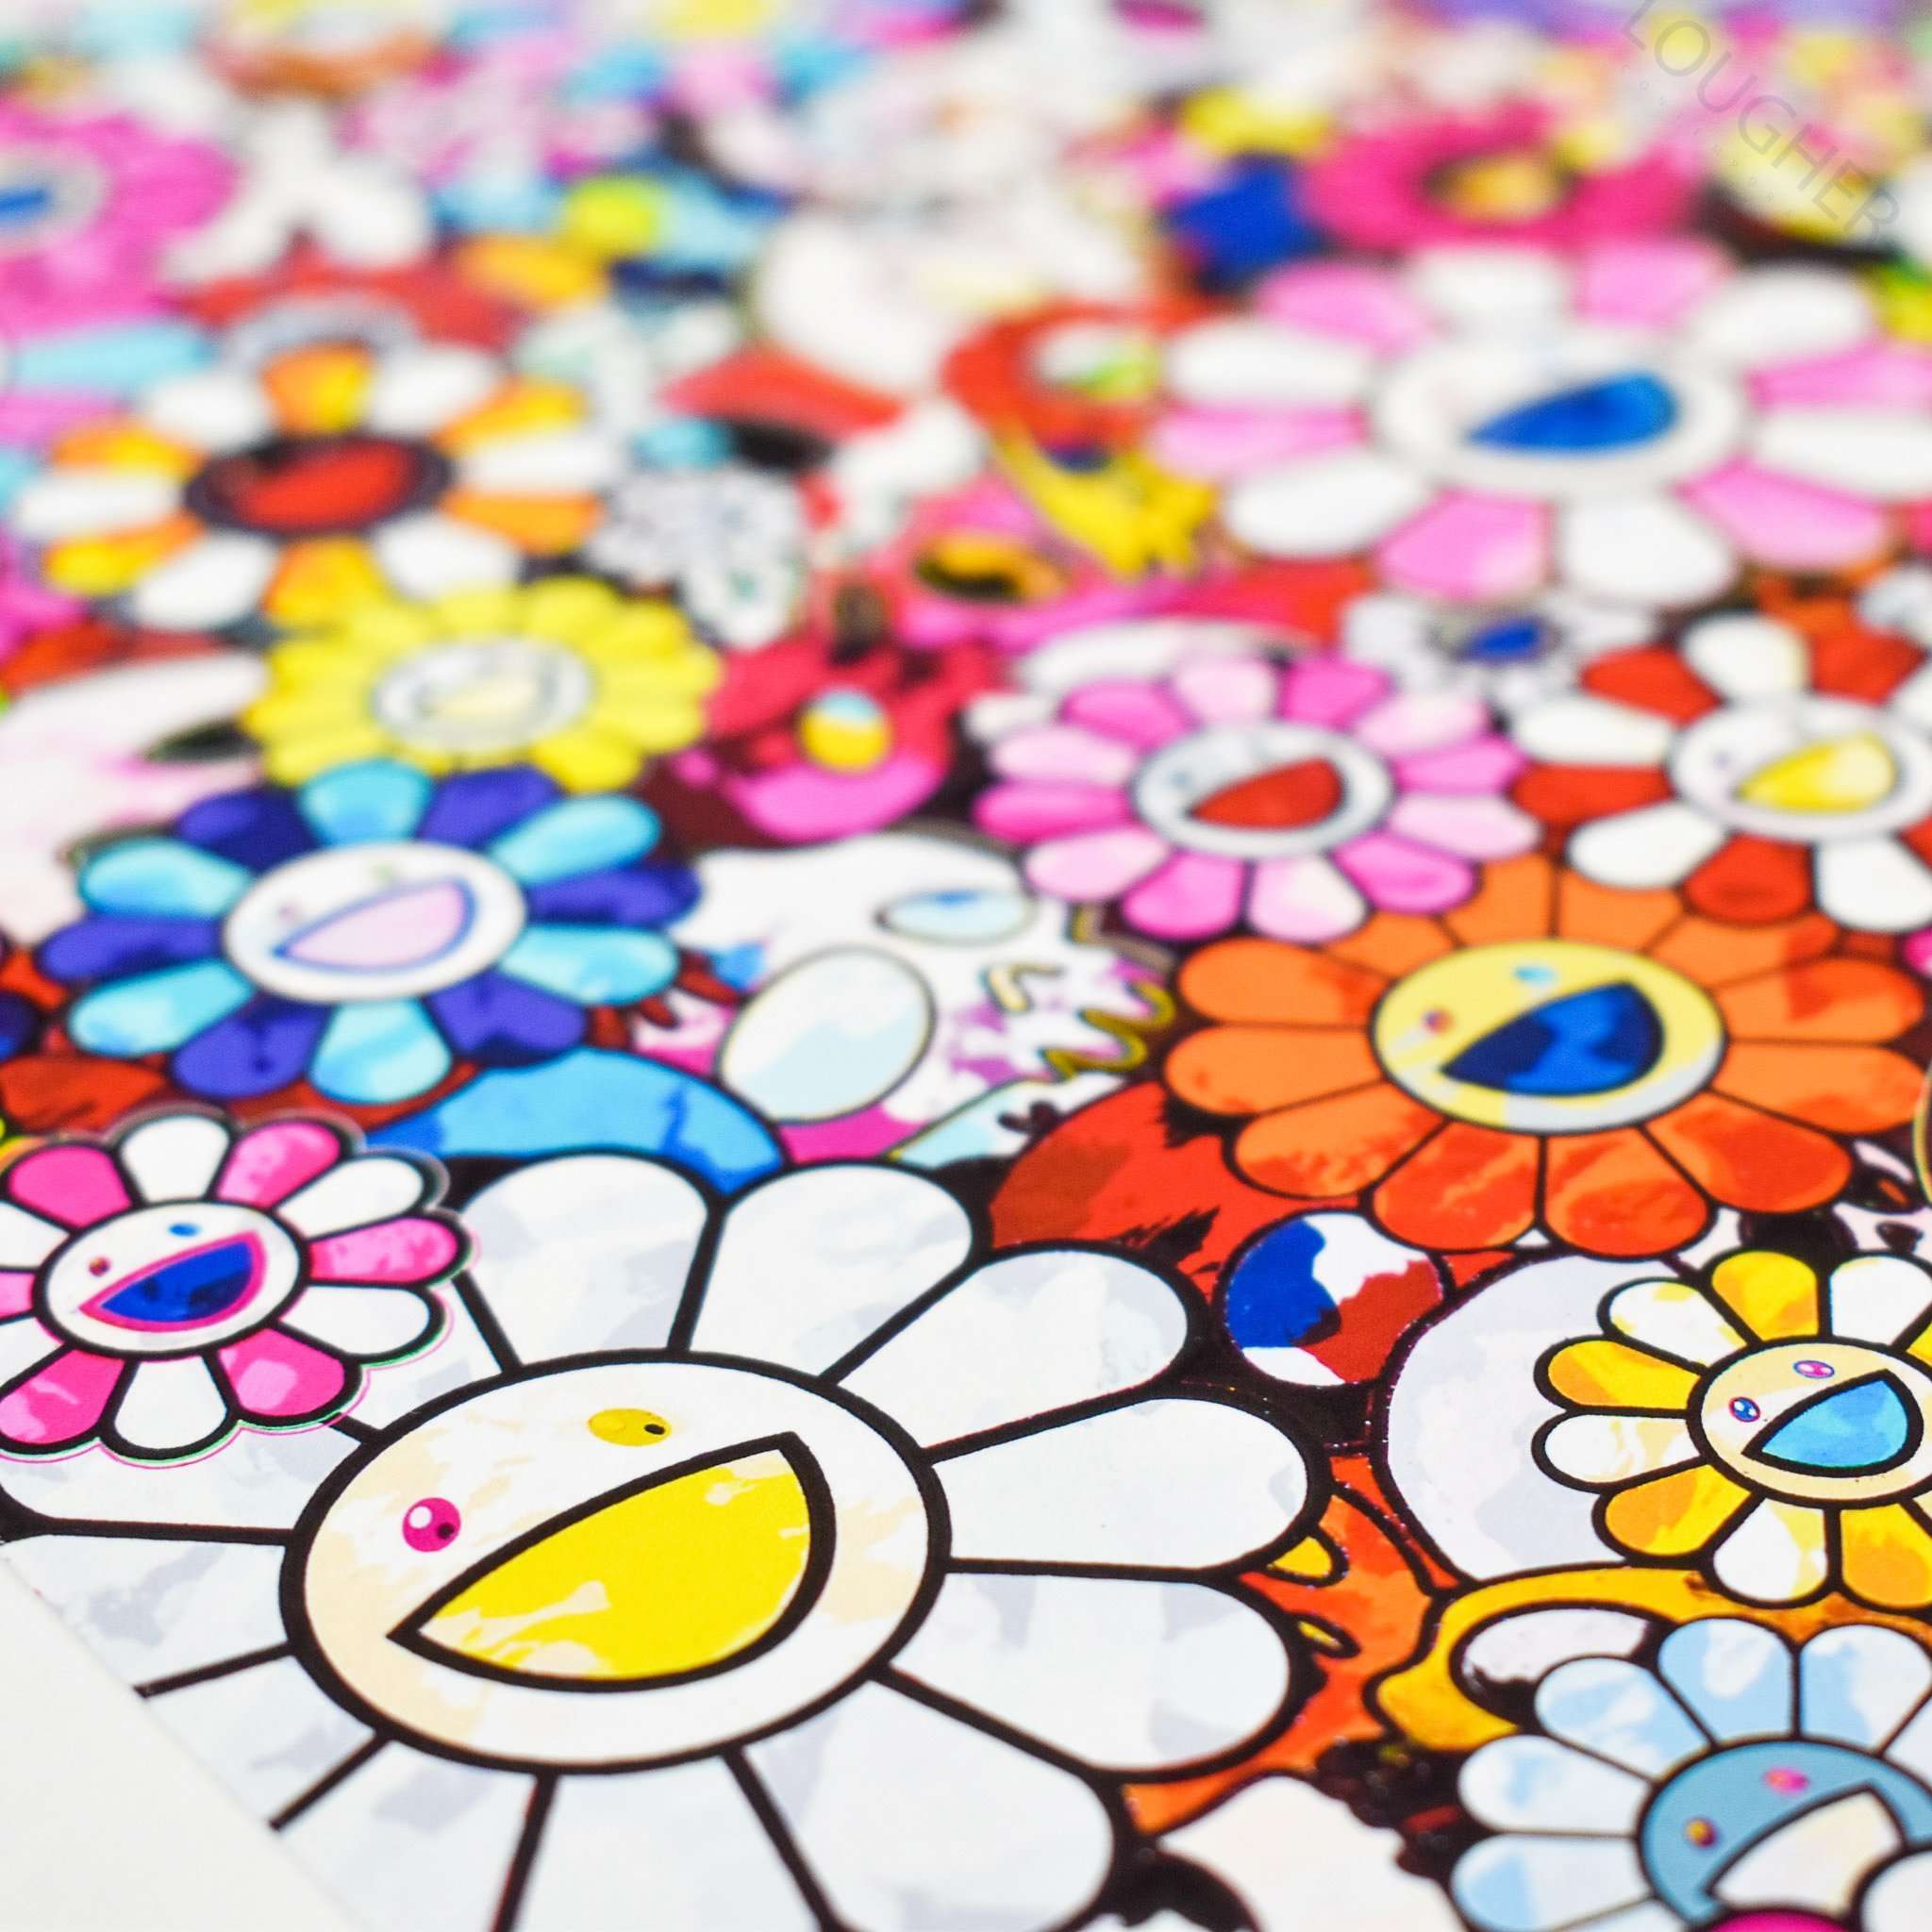 Takashi Murakami, Dazzling Circus: Embrace Peace and Darkness within Thy Heart, 2020 For Sale - Lougher Contemporary